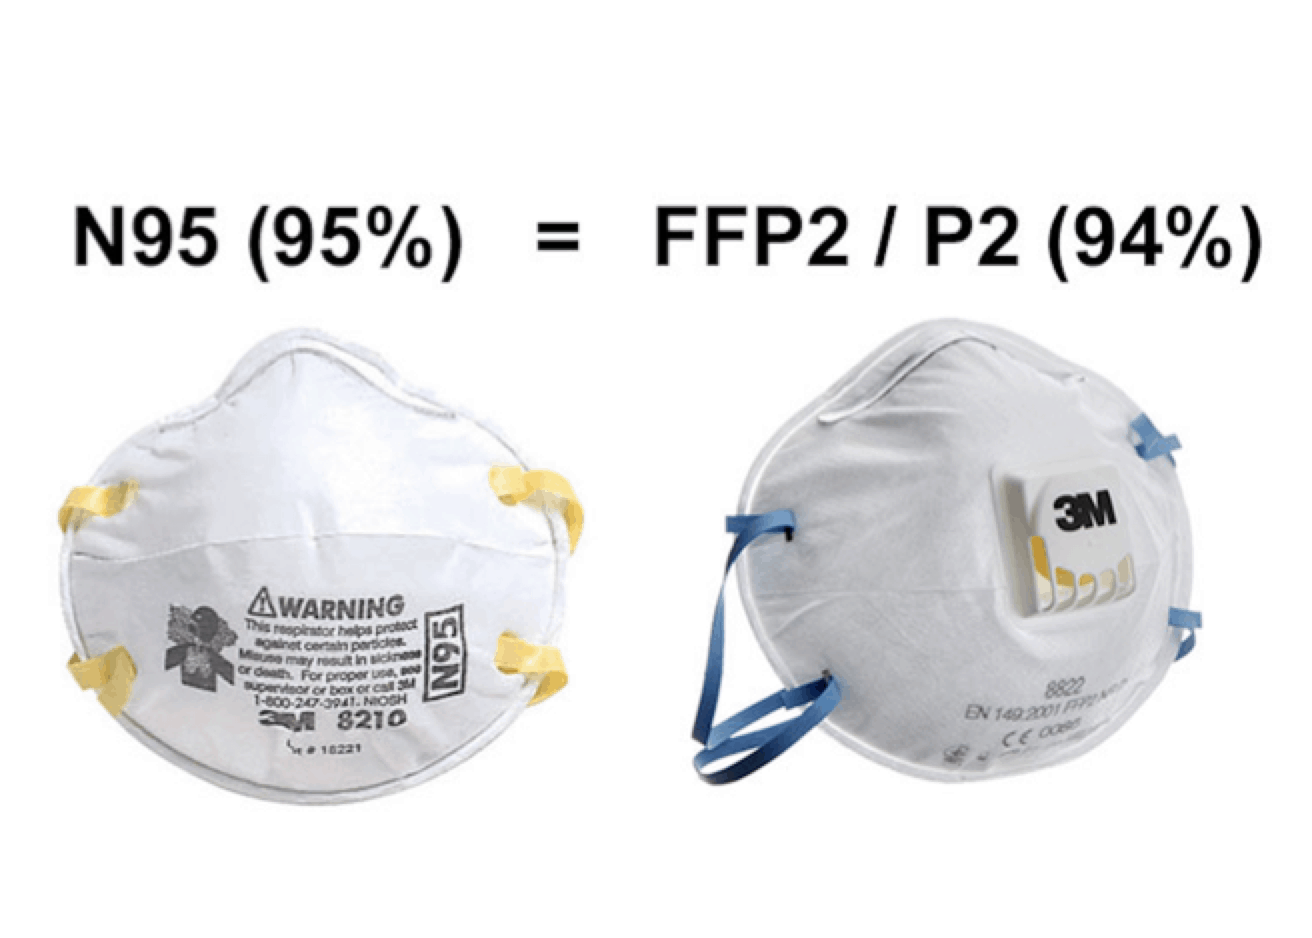 Comparison of FFP2, KN95, N95 and Other Respirator Classes